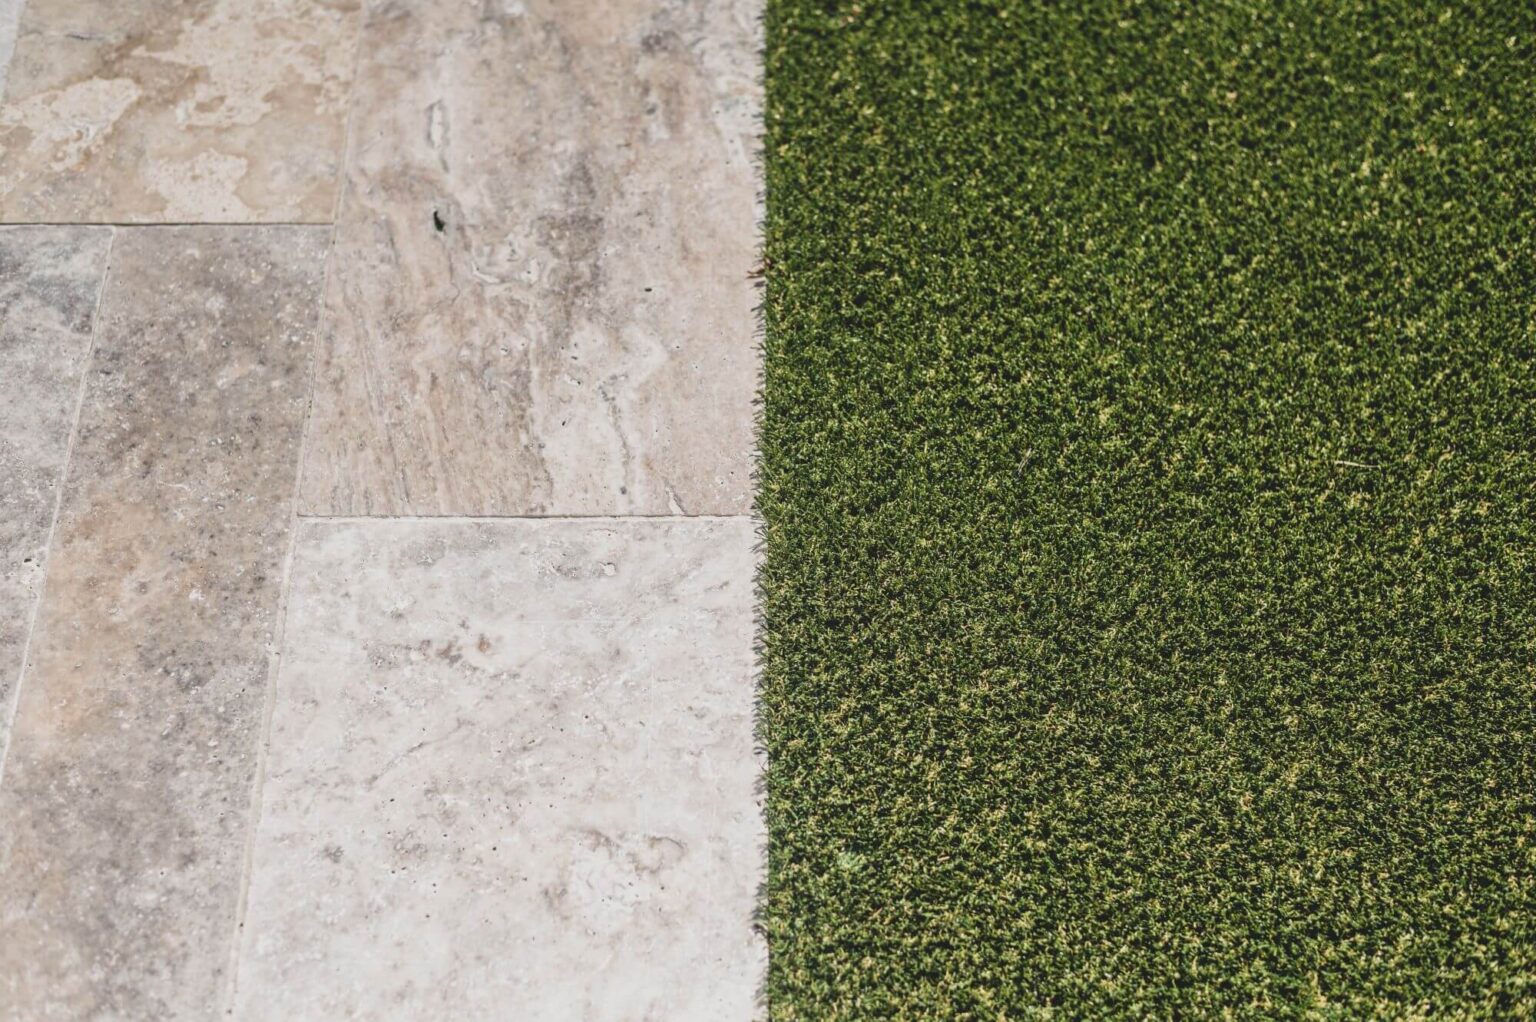 This photo represents a concrete flooring with artificial turf. Looking at this, you might wonder "How long does artificial turf last?", but in one of our blogs, we answer that!